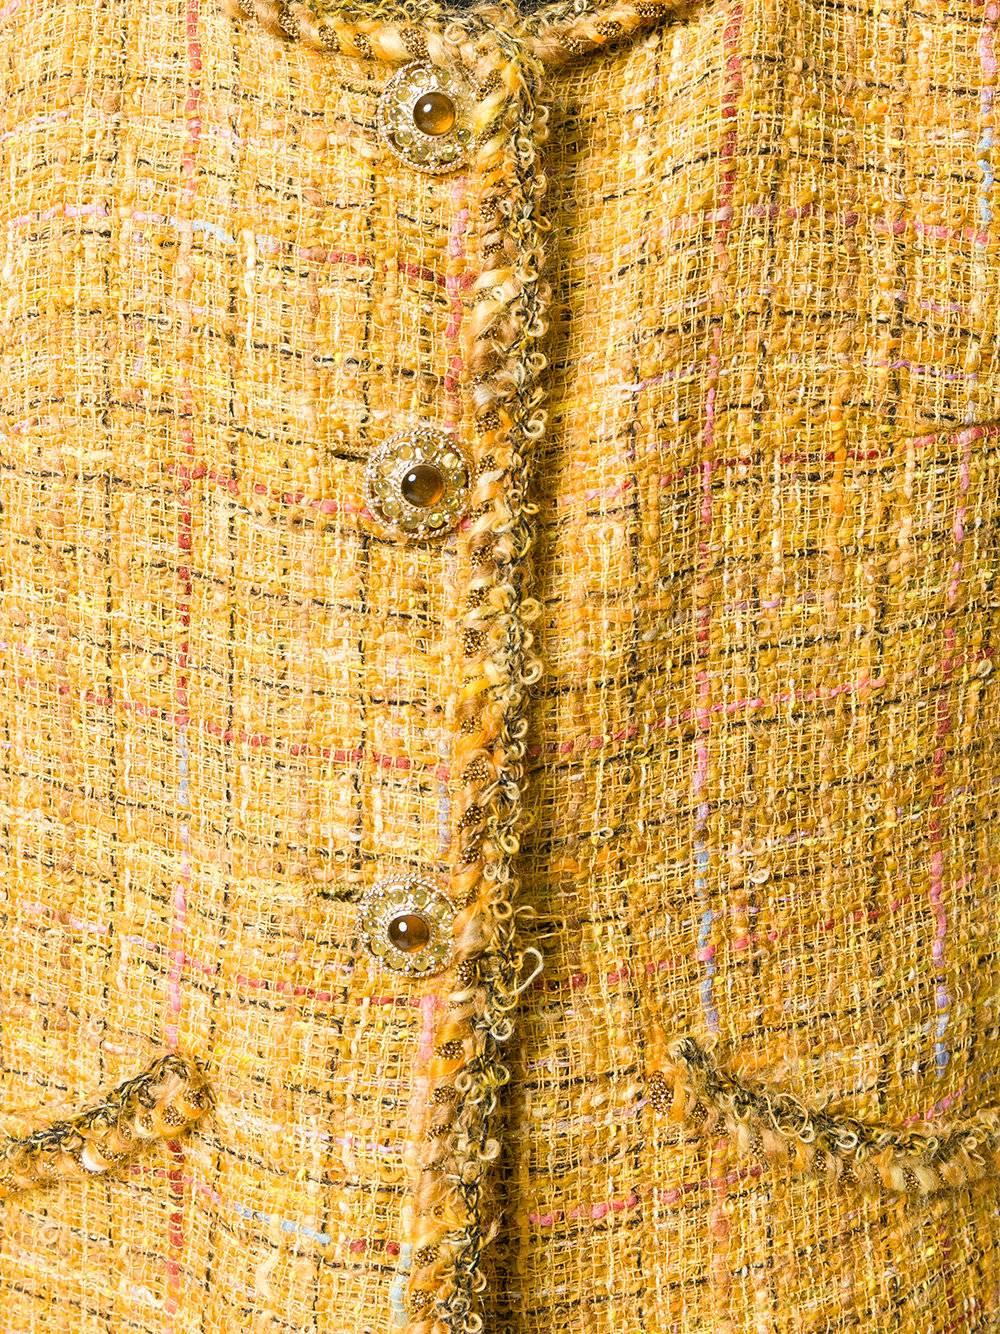 This vintage Chanel twinset is woven from tweed in a deep saffron hue, underscored by threads toned in sparkly gold, pastels and black. Its straight-fitted waistcoat fastens with gold-tone medallions inlaid with gems. The mini skirt is cleaved at